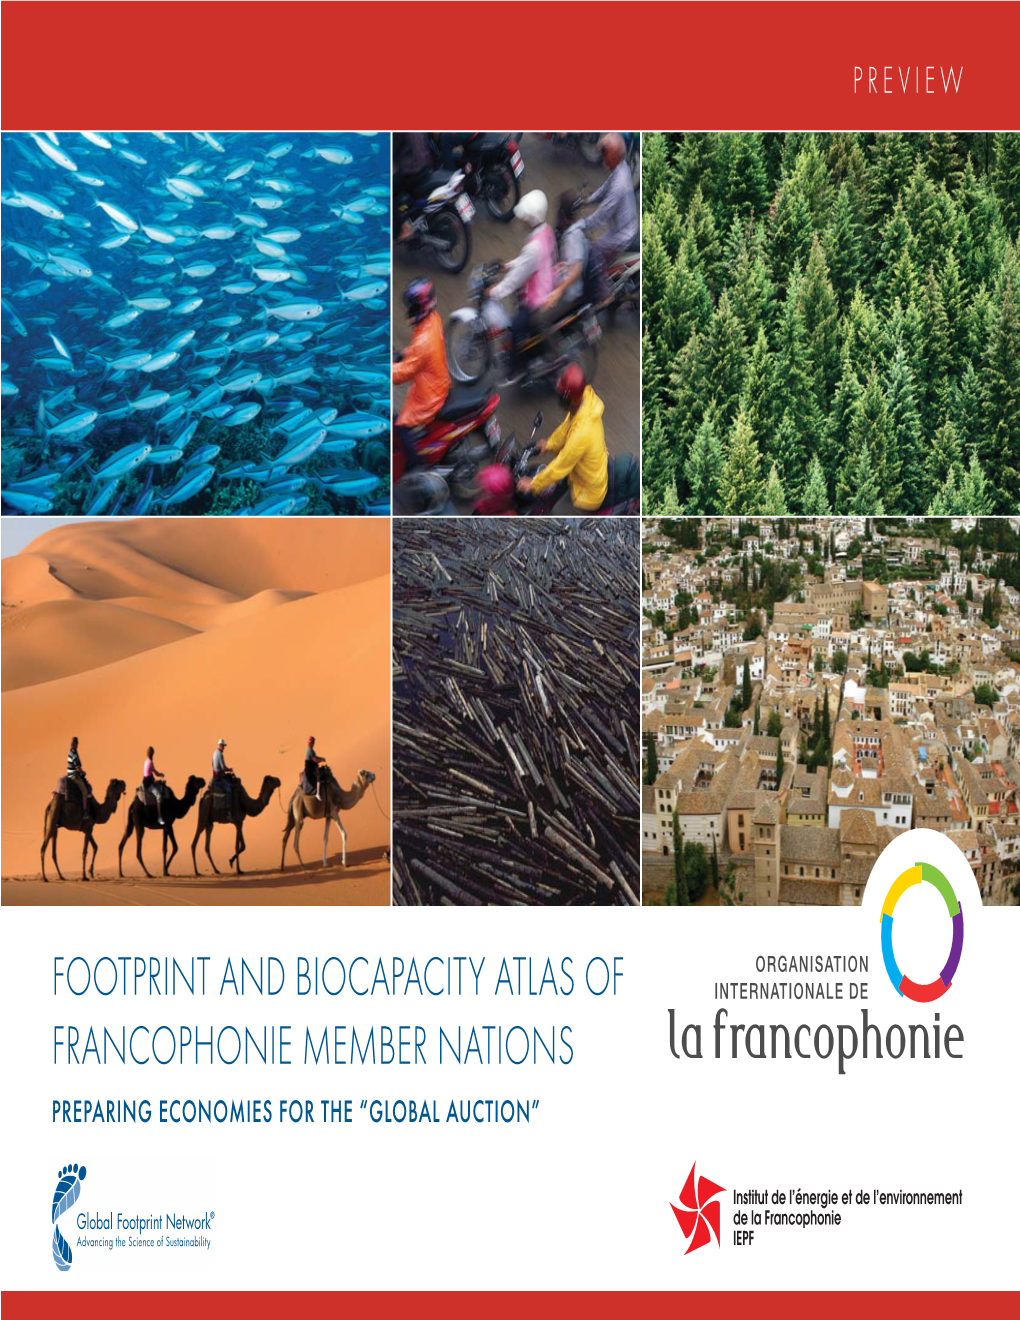 Footprint and Biocapacity Atlas of Francophonie Member Nations Preparing Economies for the “Global Auction” Table of Contents